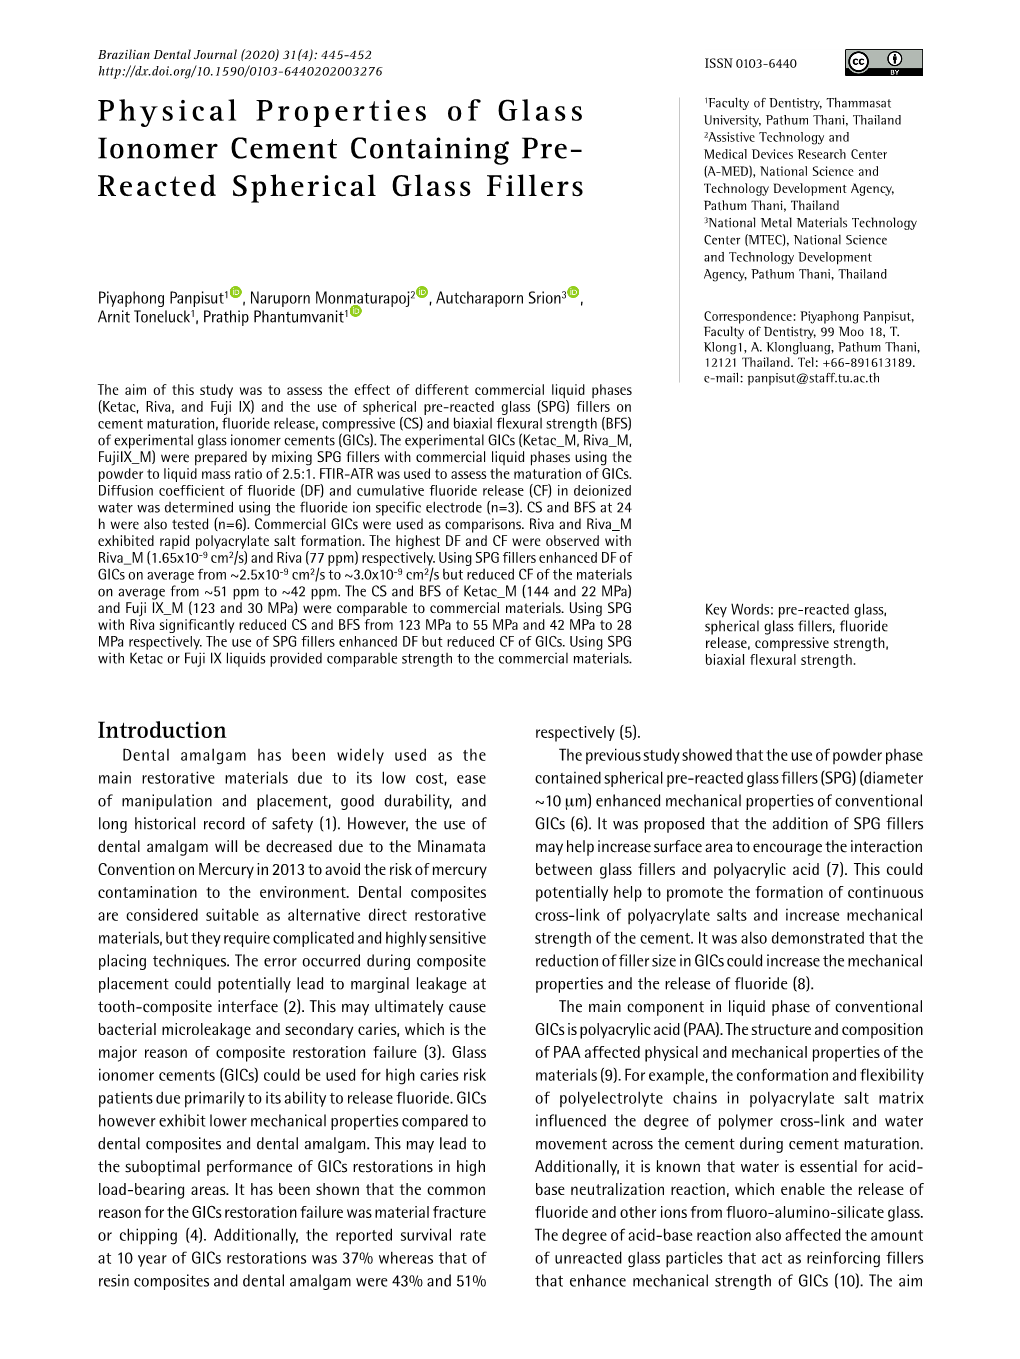 Physical Properties of Glass Ionomer Cement Containing